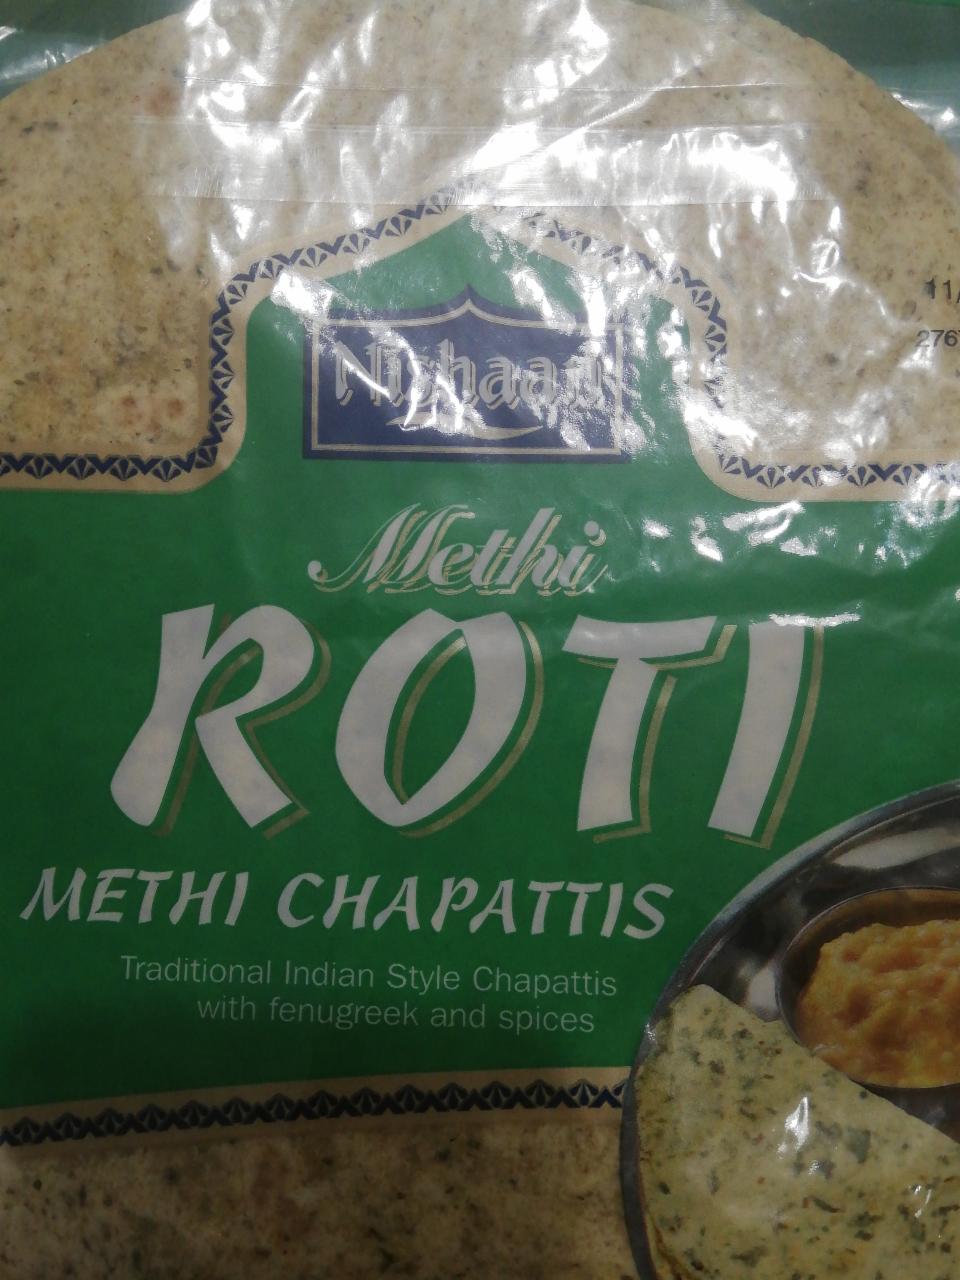 Fotografie - Methi Roti Chapattis with Fenugreek and Spices Nishaan